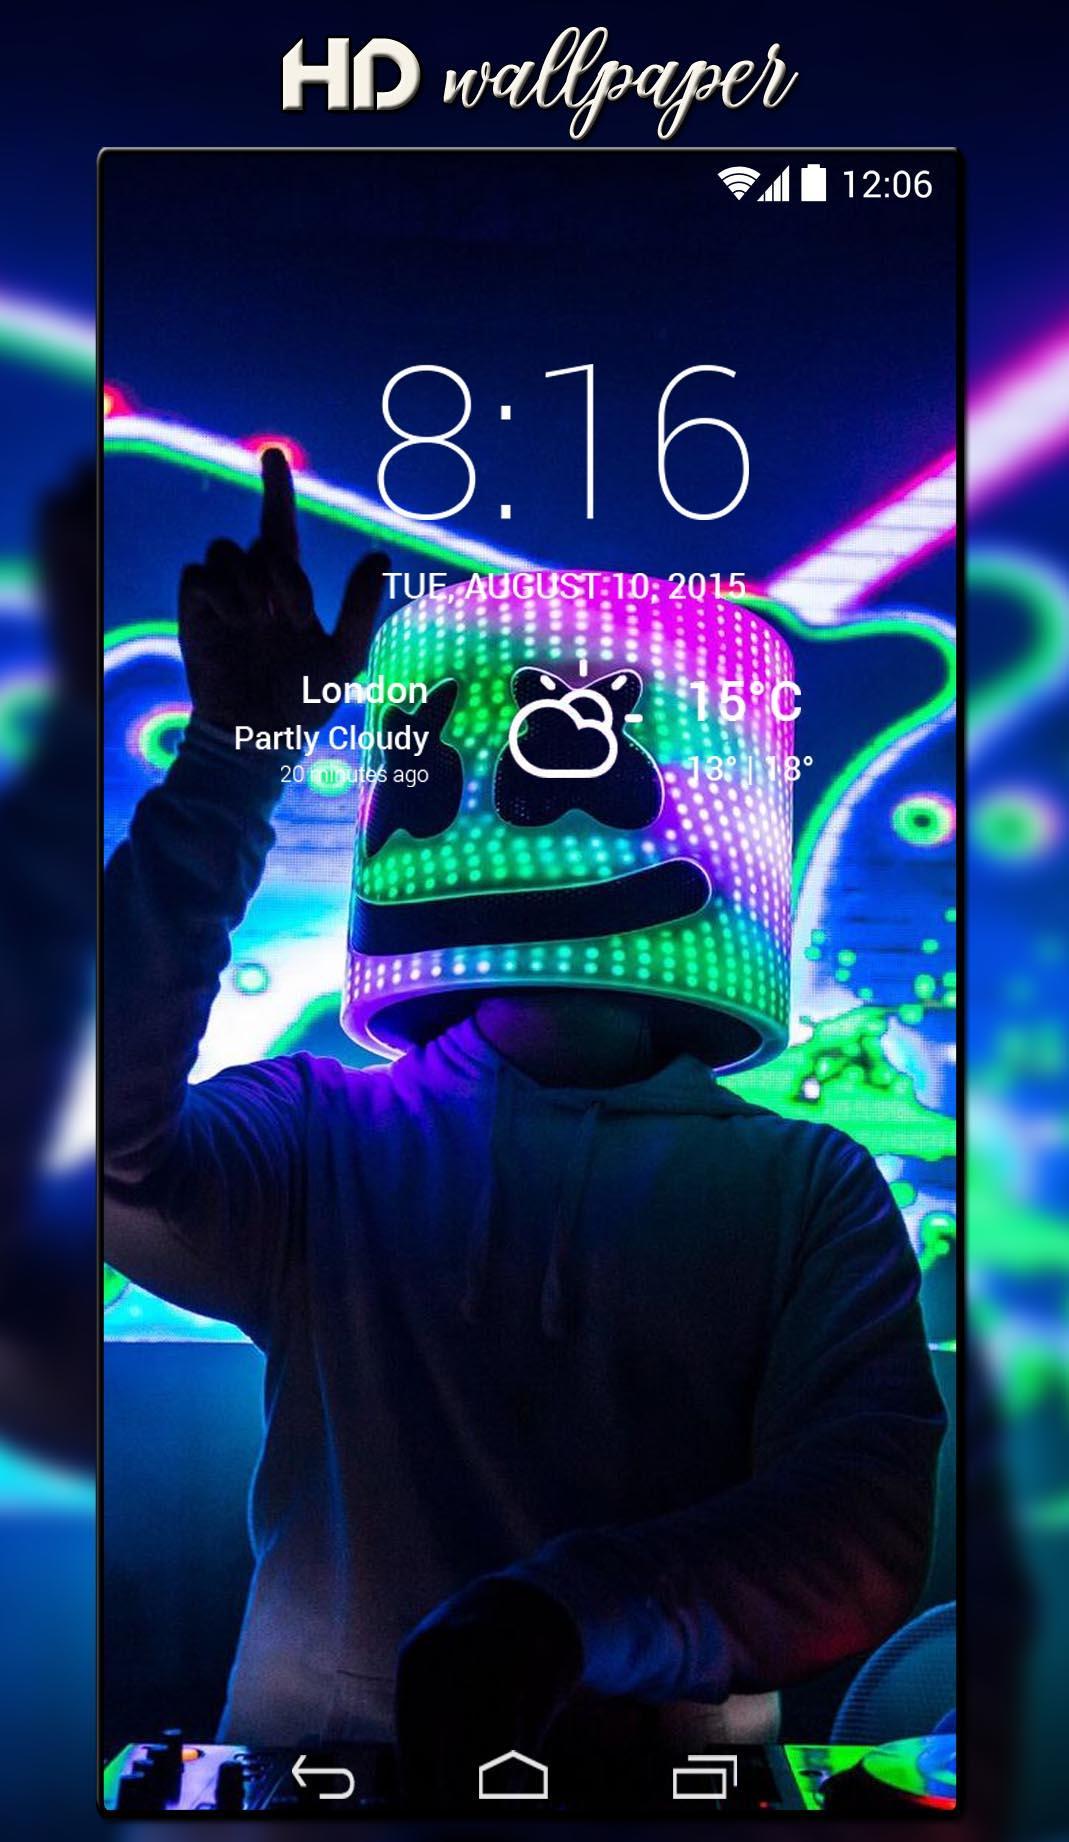 Dj Marshmello Wallpaper For Android Apk Download